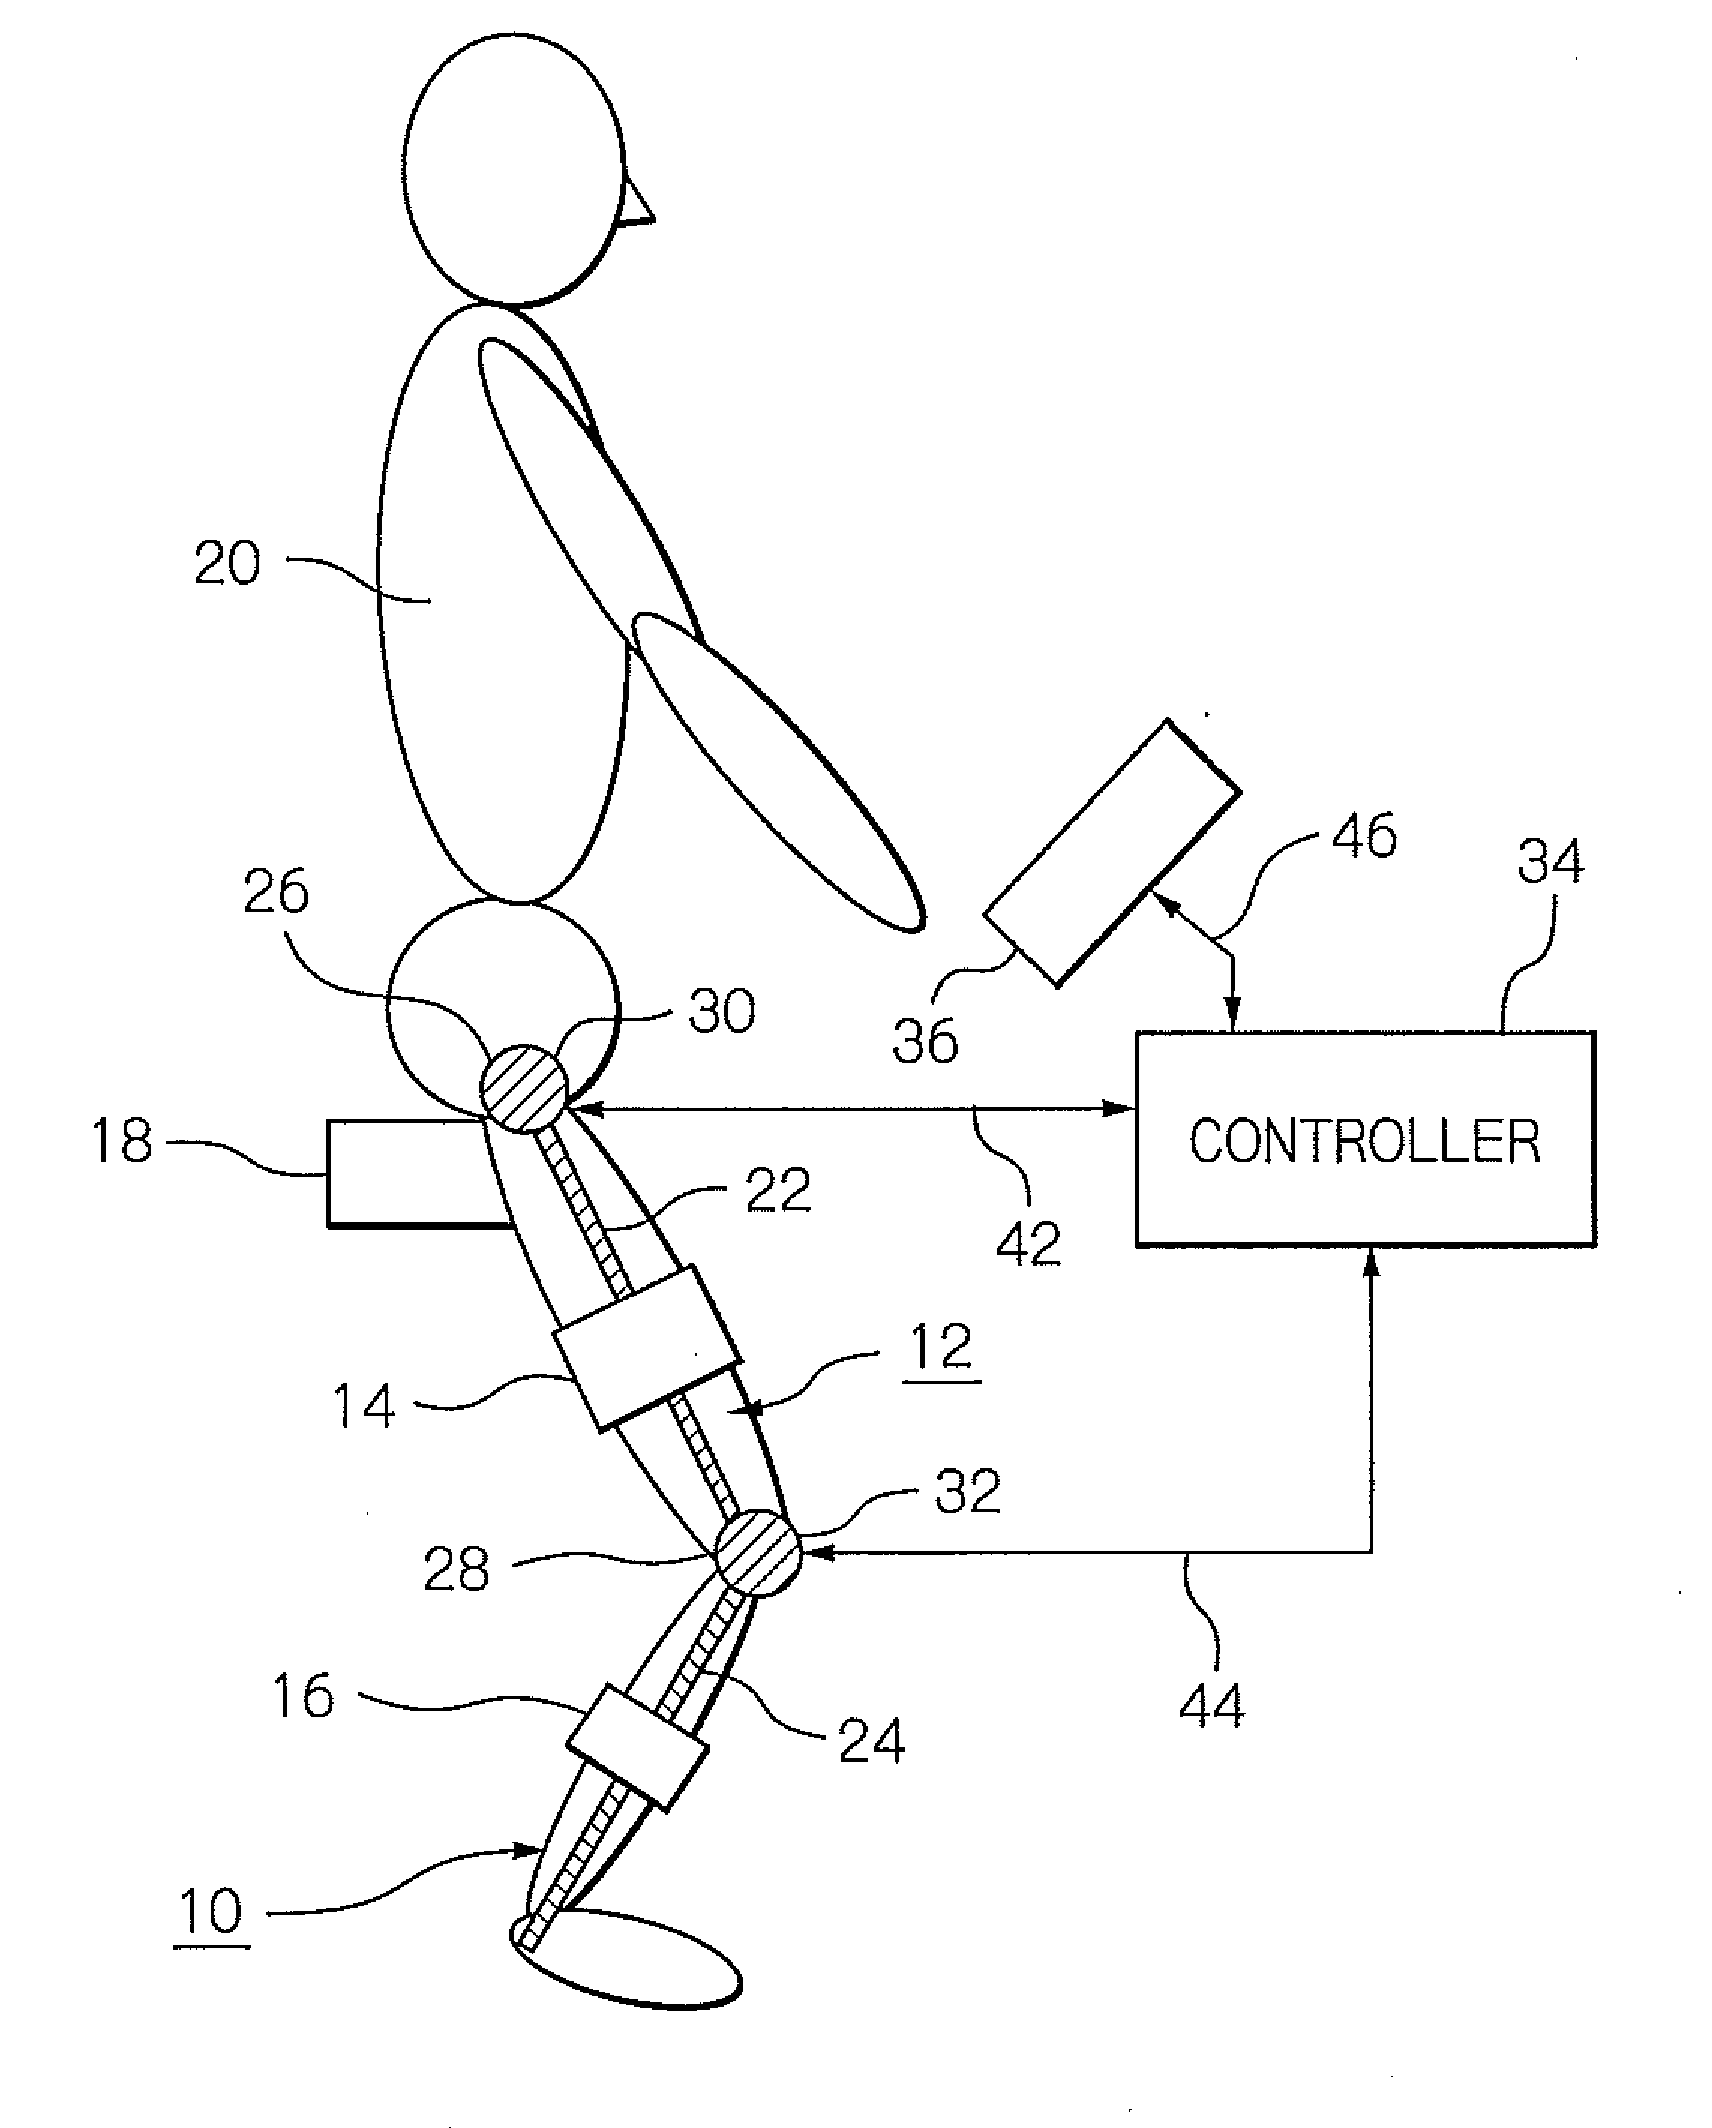 Muscle training device with muscular force measurement function for controlling the axial torque of a joint axle